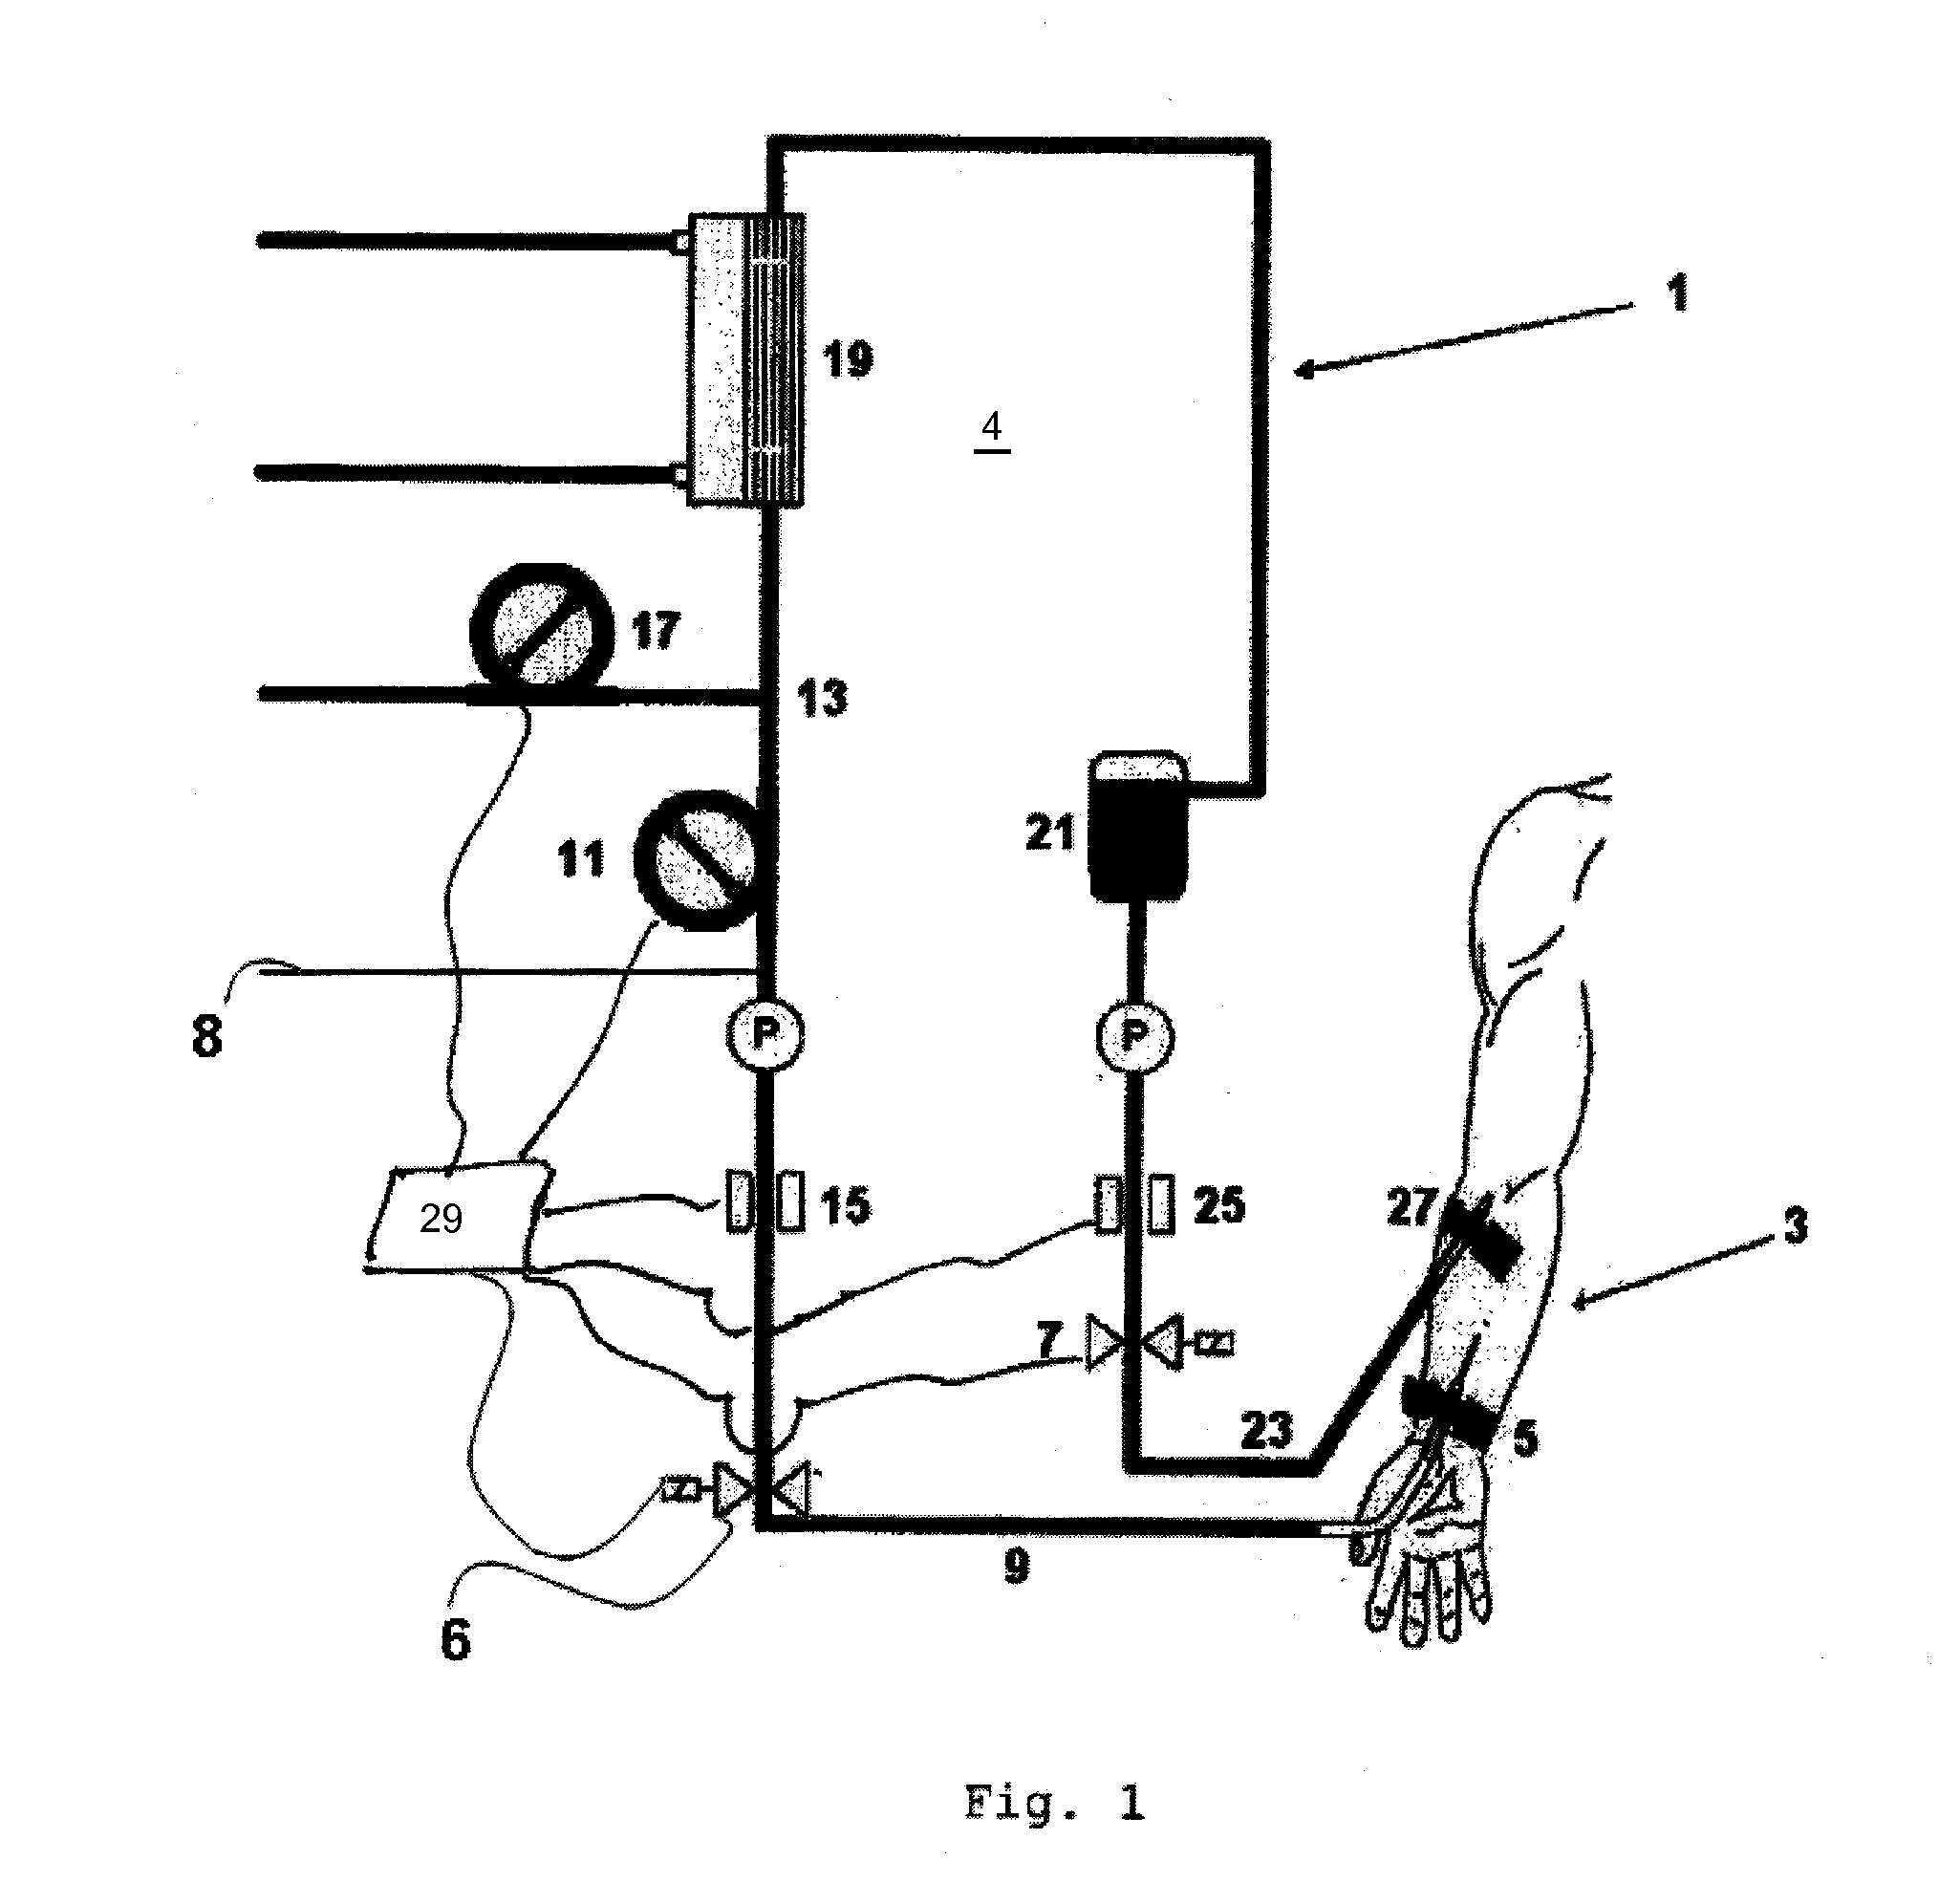 Method for removing blood from an extracorporeal blood circuit for a treatment apparatus following termination of a blood treatment session, and apparatus for performing said method